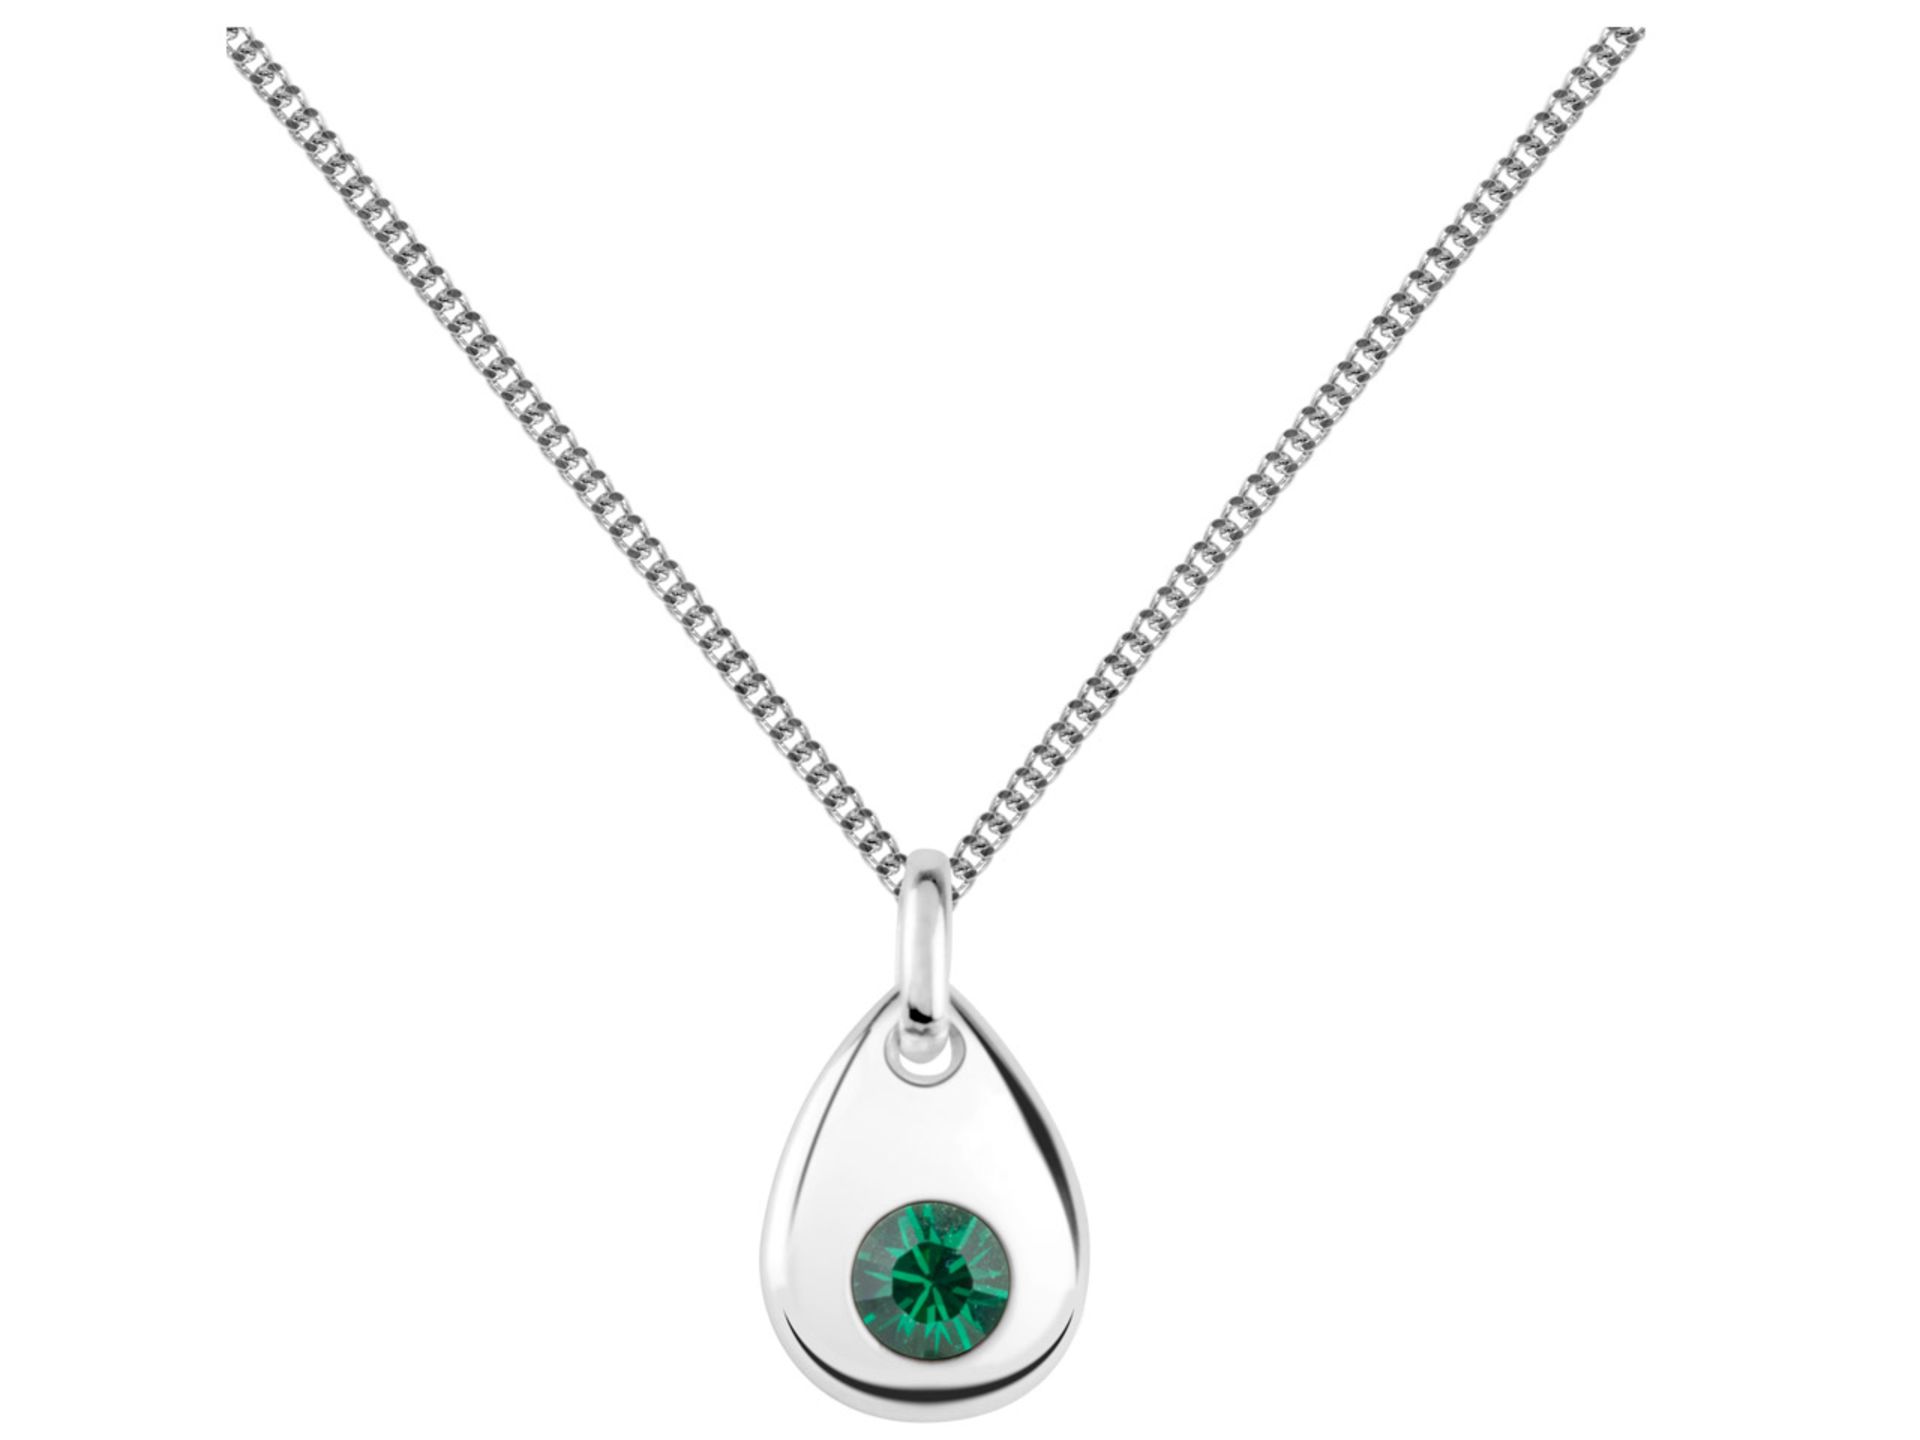 Sterling Silver Pendant August Birthstone 4mm Period Crystal - Valued By AGI £482.00 - Certificate - Image 3 of 4